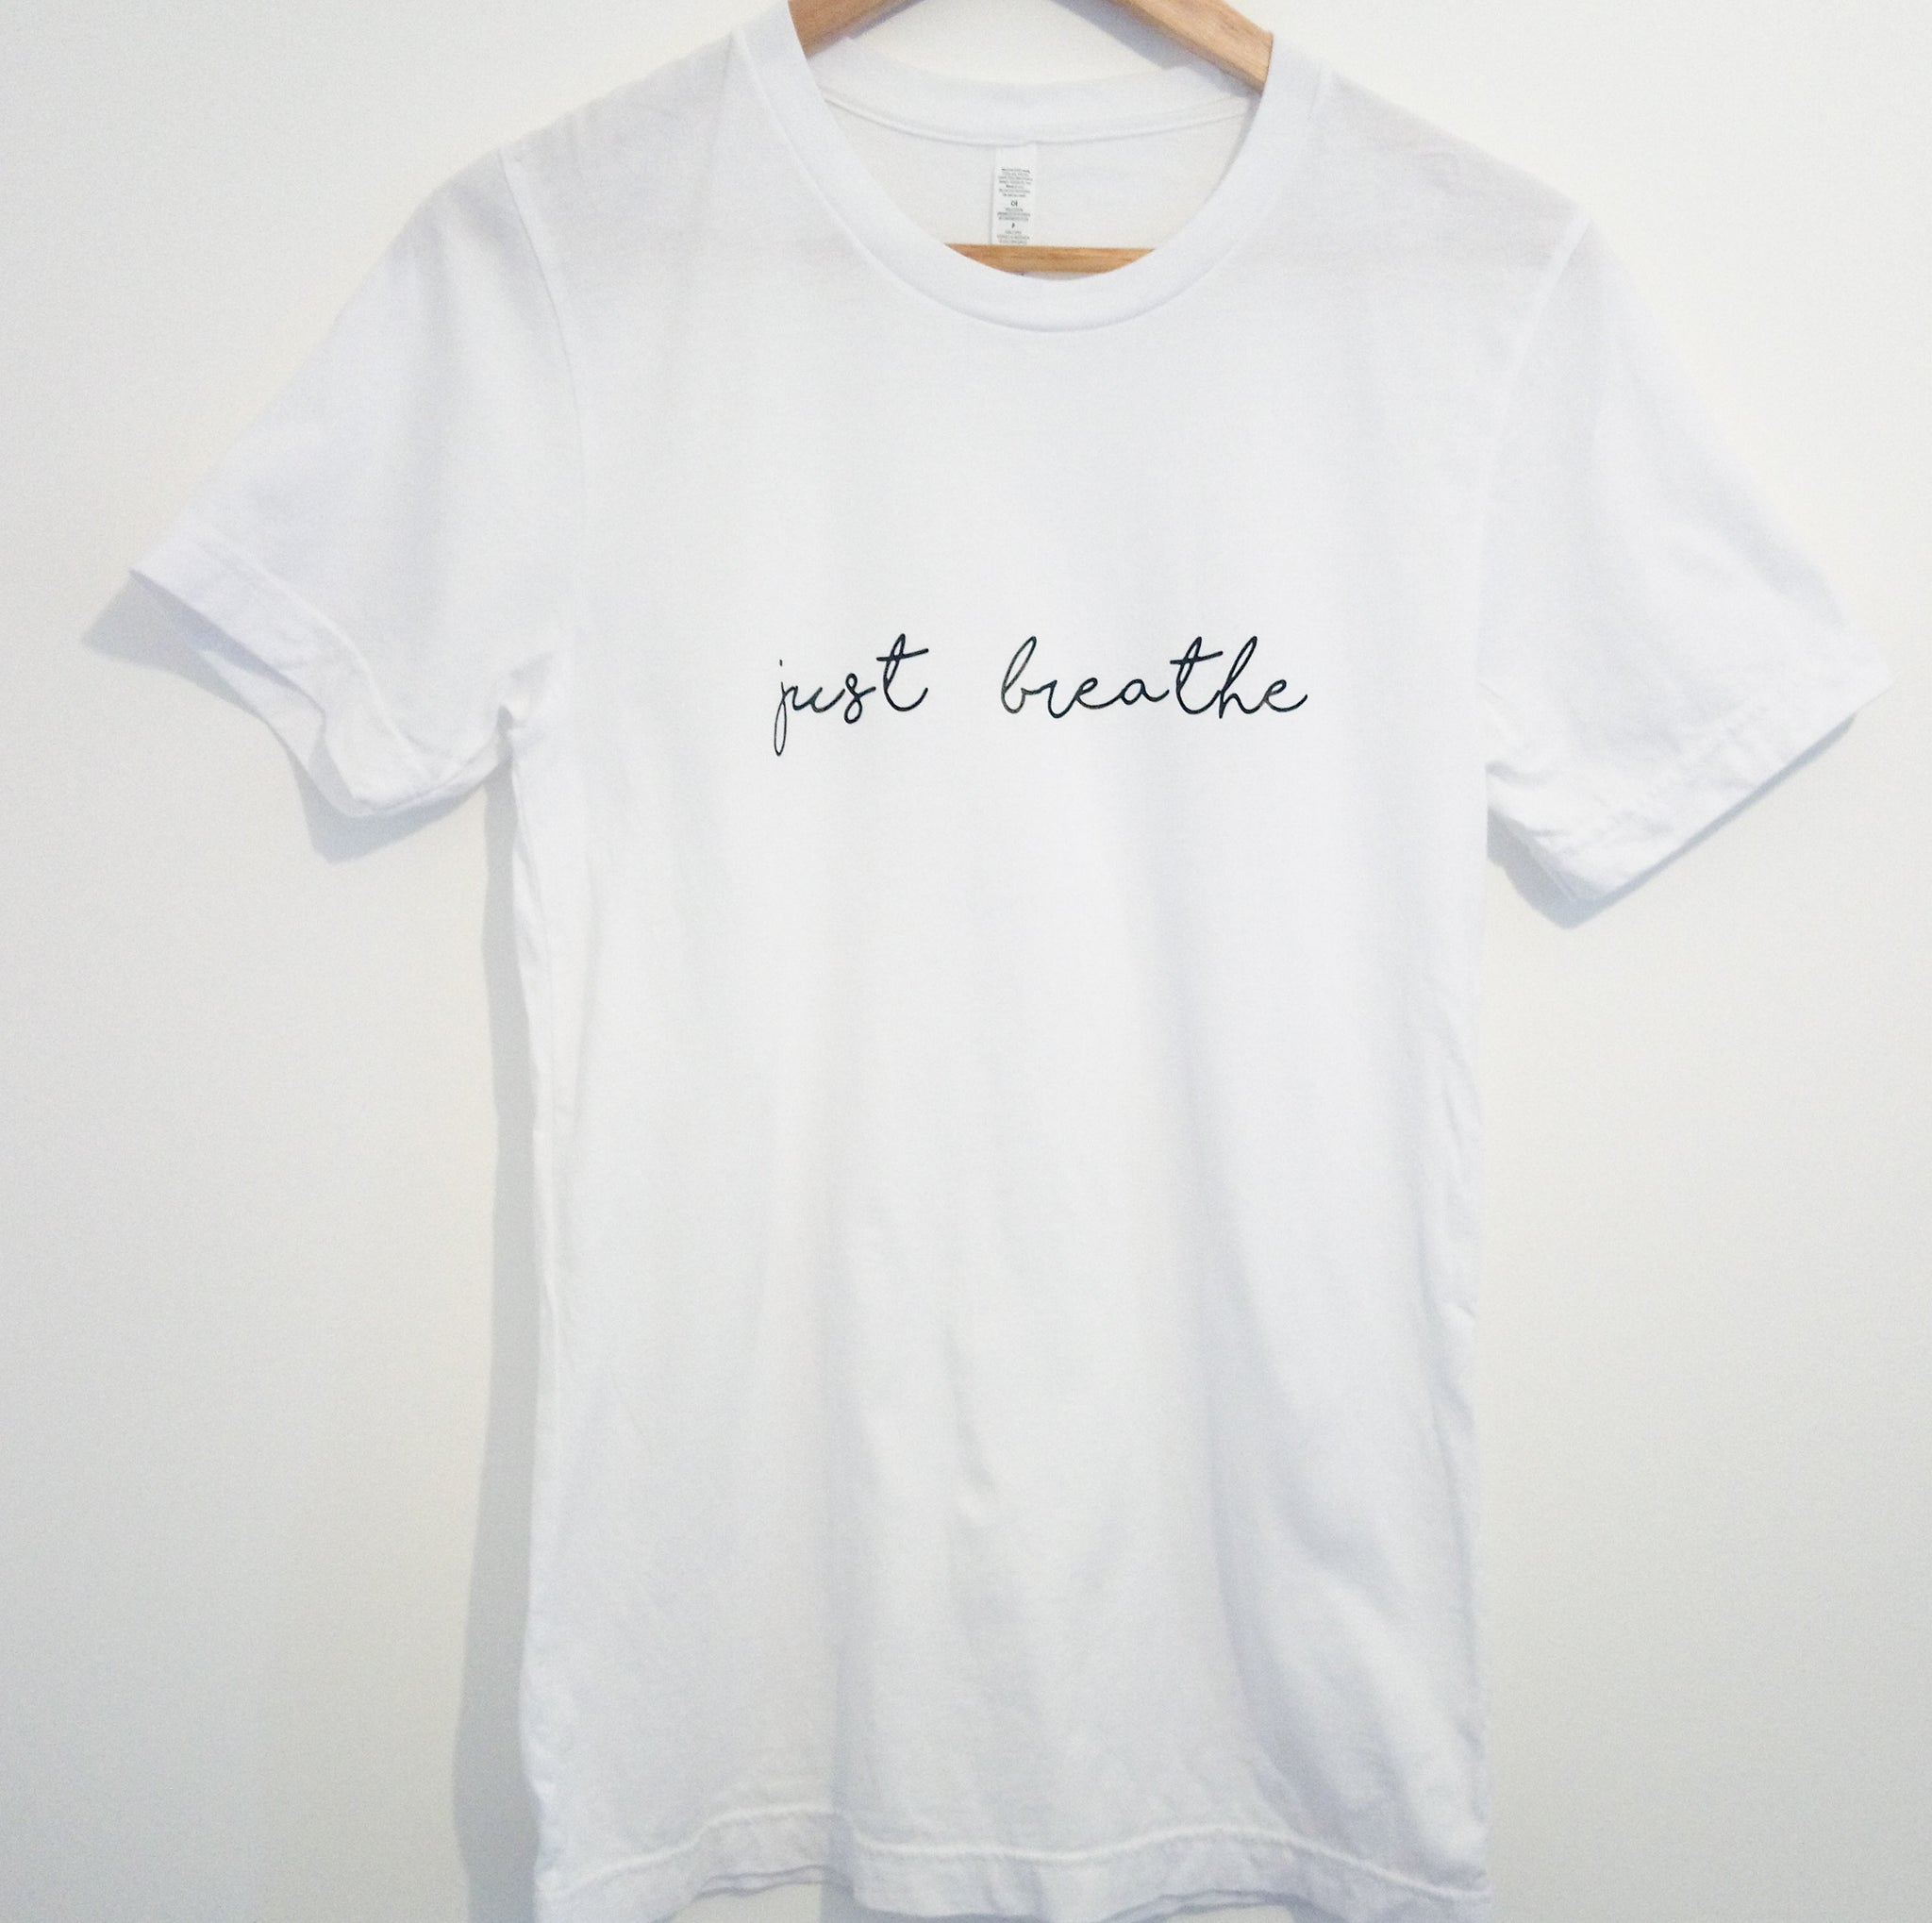 Unisex "just breathe" cotton t shirt - donation made to Cystic Fibrosis Trust for every one sold